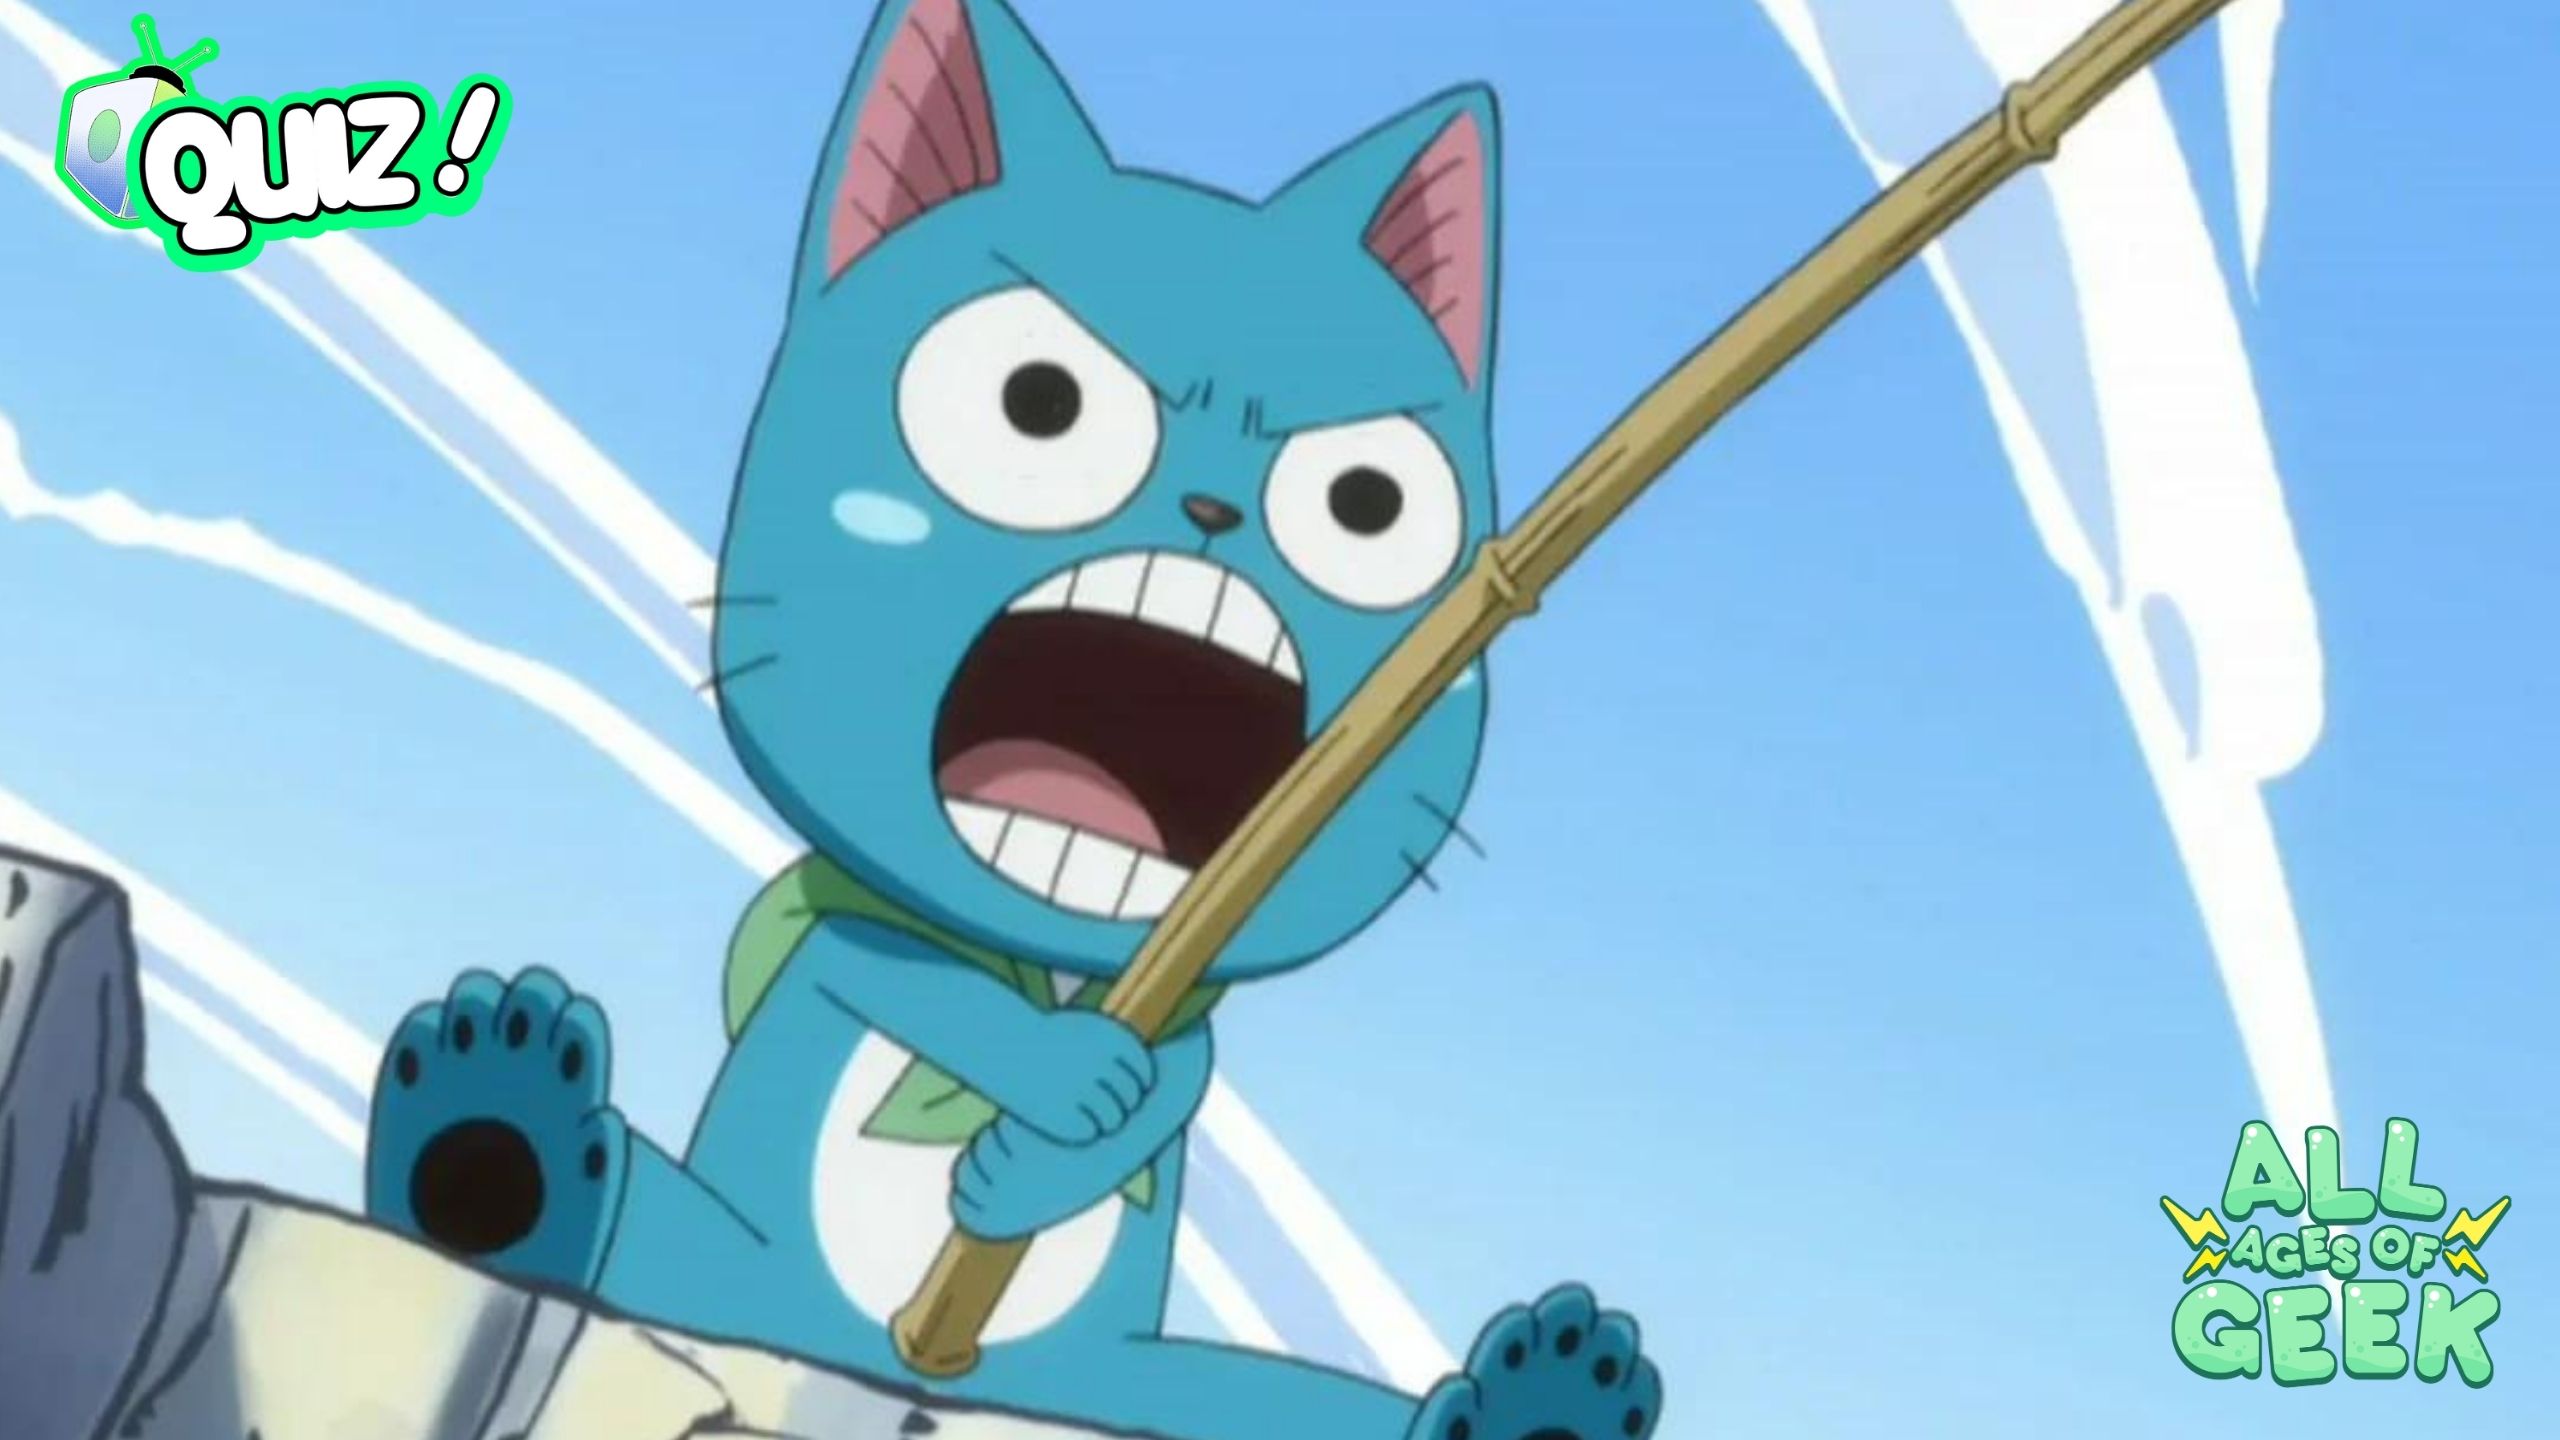 Happy from Fairy Tail, the blue Exceed, is shown in an intense moment with a determined expression, holding a fishing rod. The image has a quiz icon in the top left corner and the All Ages of Geek logo in the bottom right.